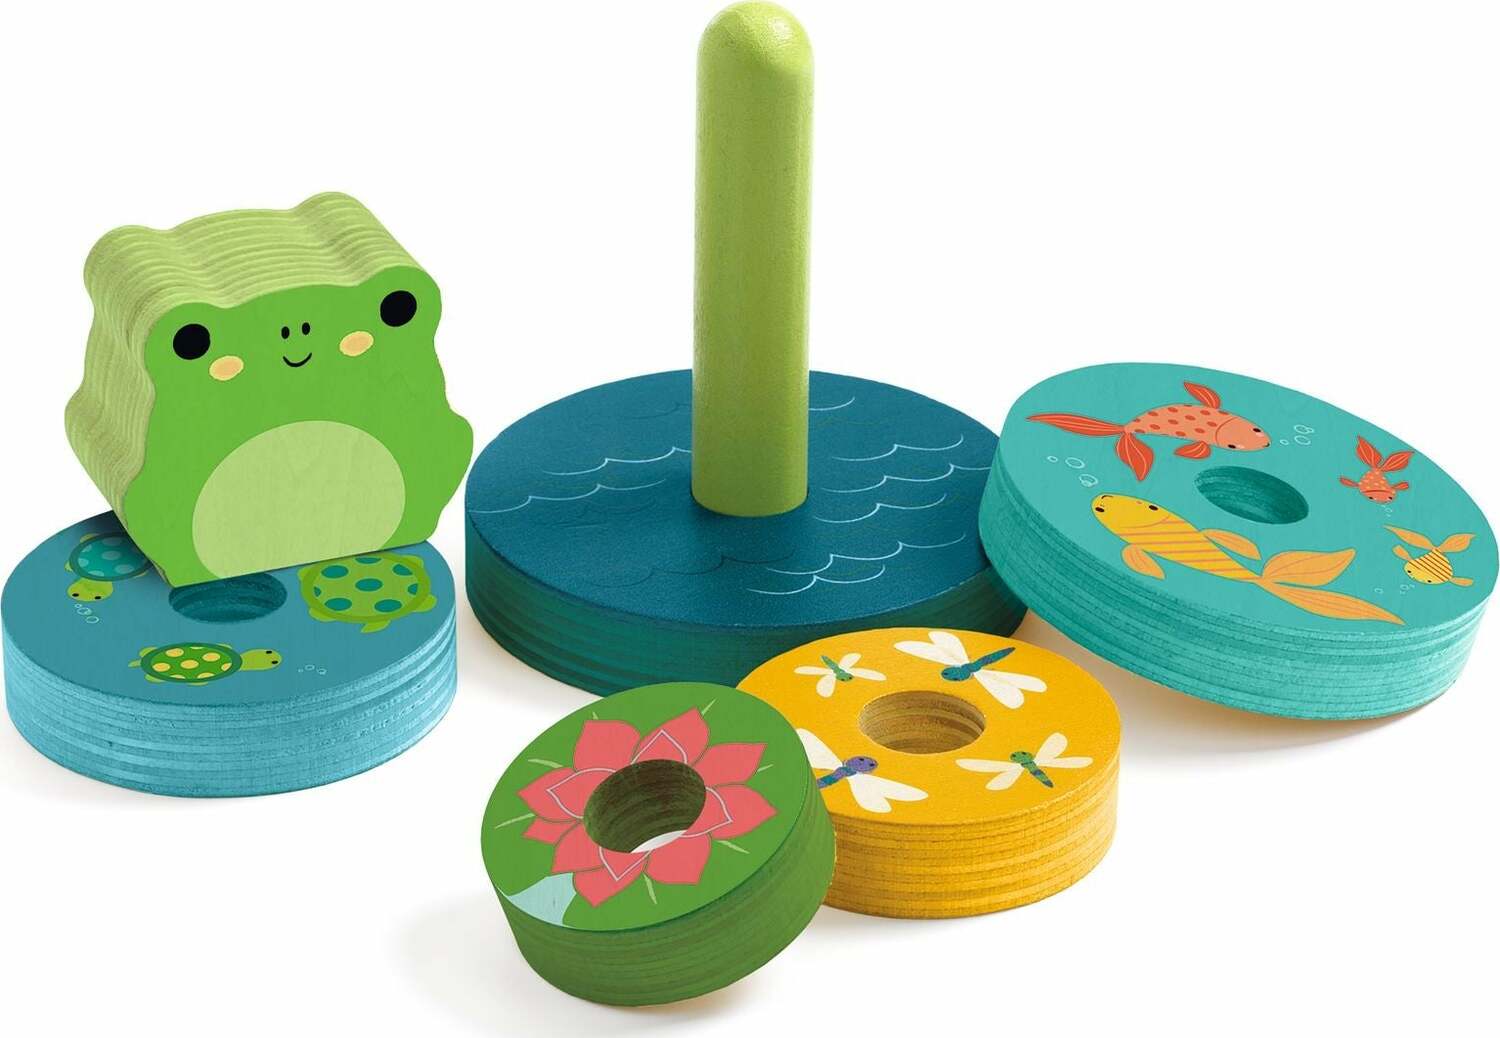 Puzz and Stack Rainbow Wooden Puzzle